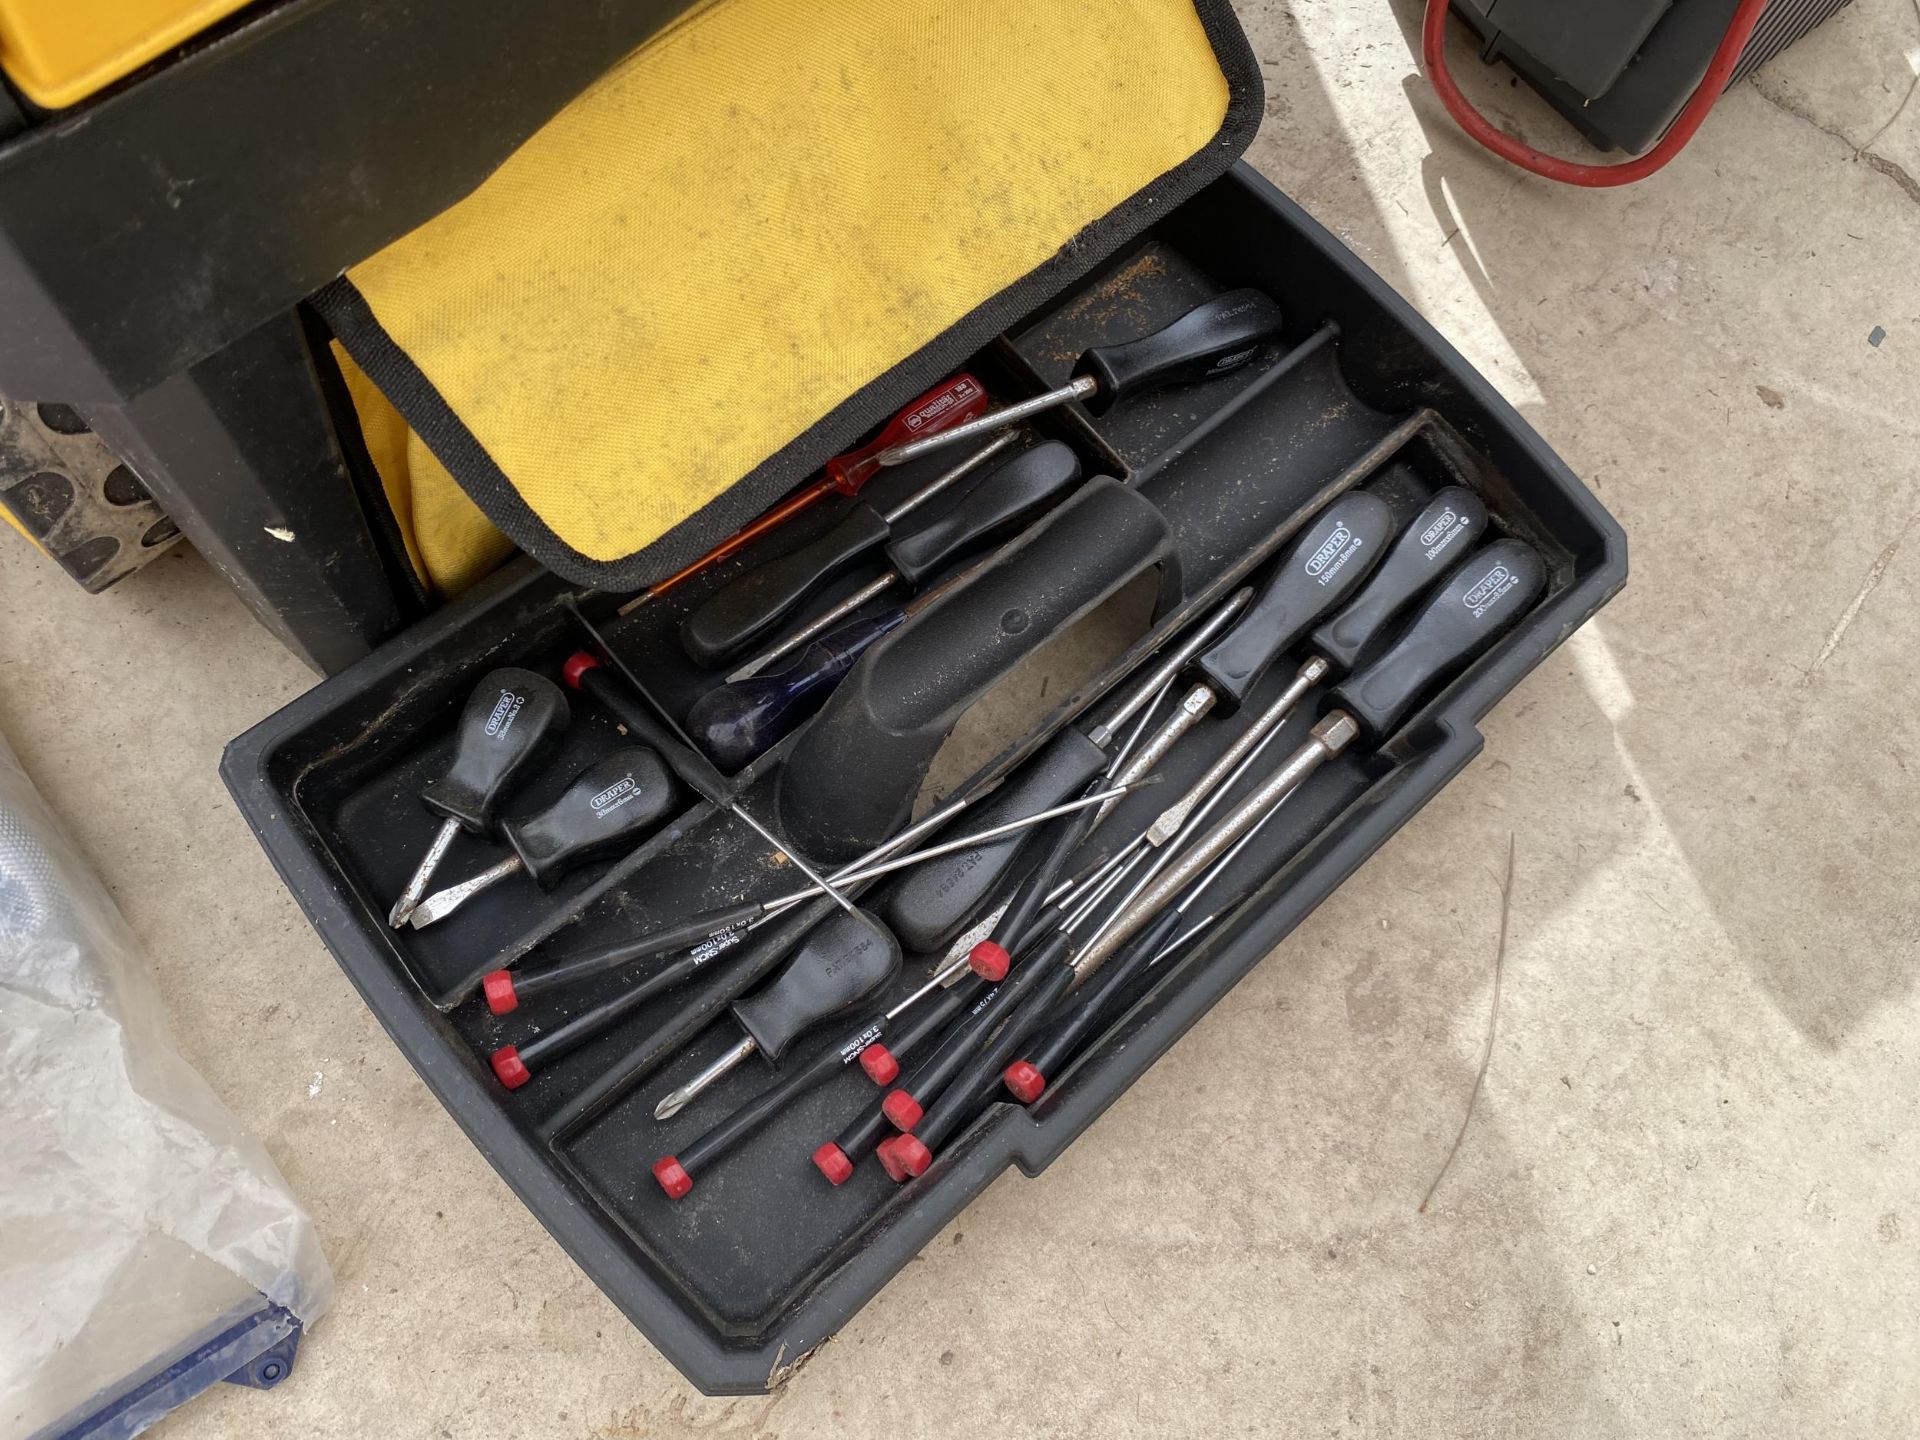 A TWO TIER MOBILE WORK CENTER WITH AN ASSORTMENT OF TOOLS TO INCLUDE SCREW DRIVERS AND SAWS - Image 3 of 3